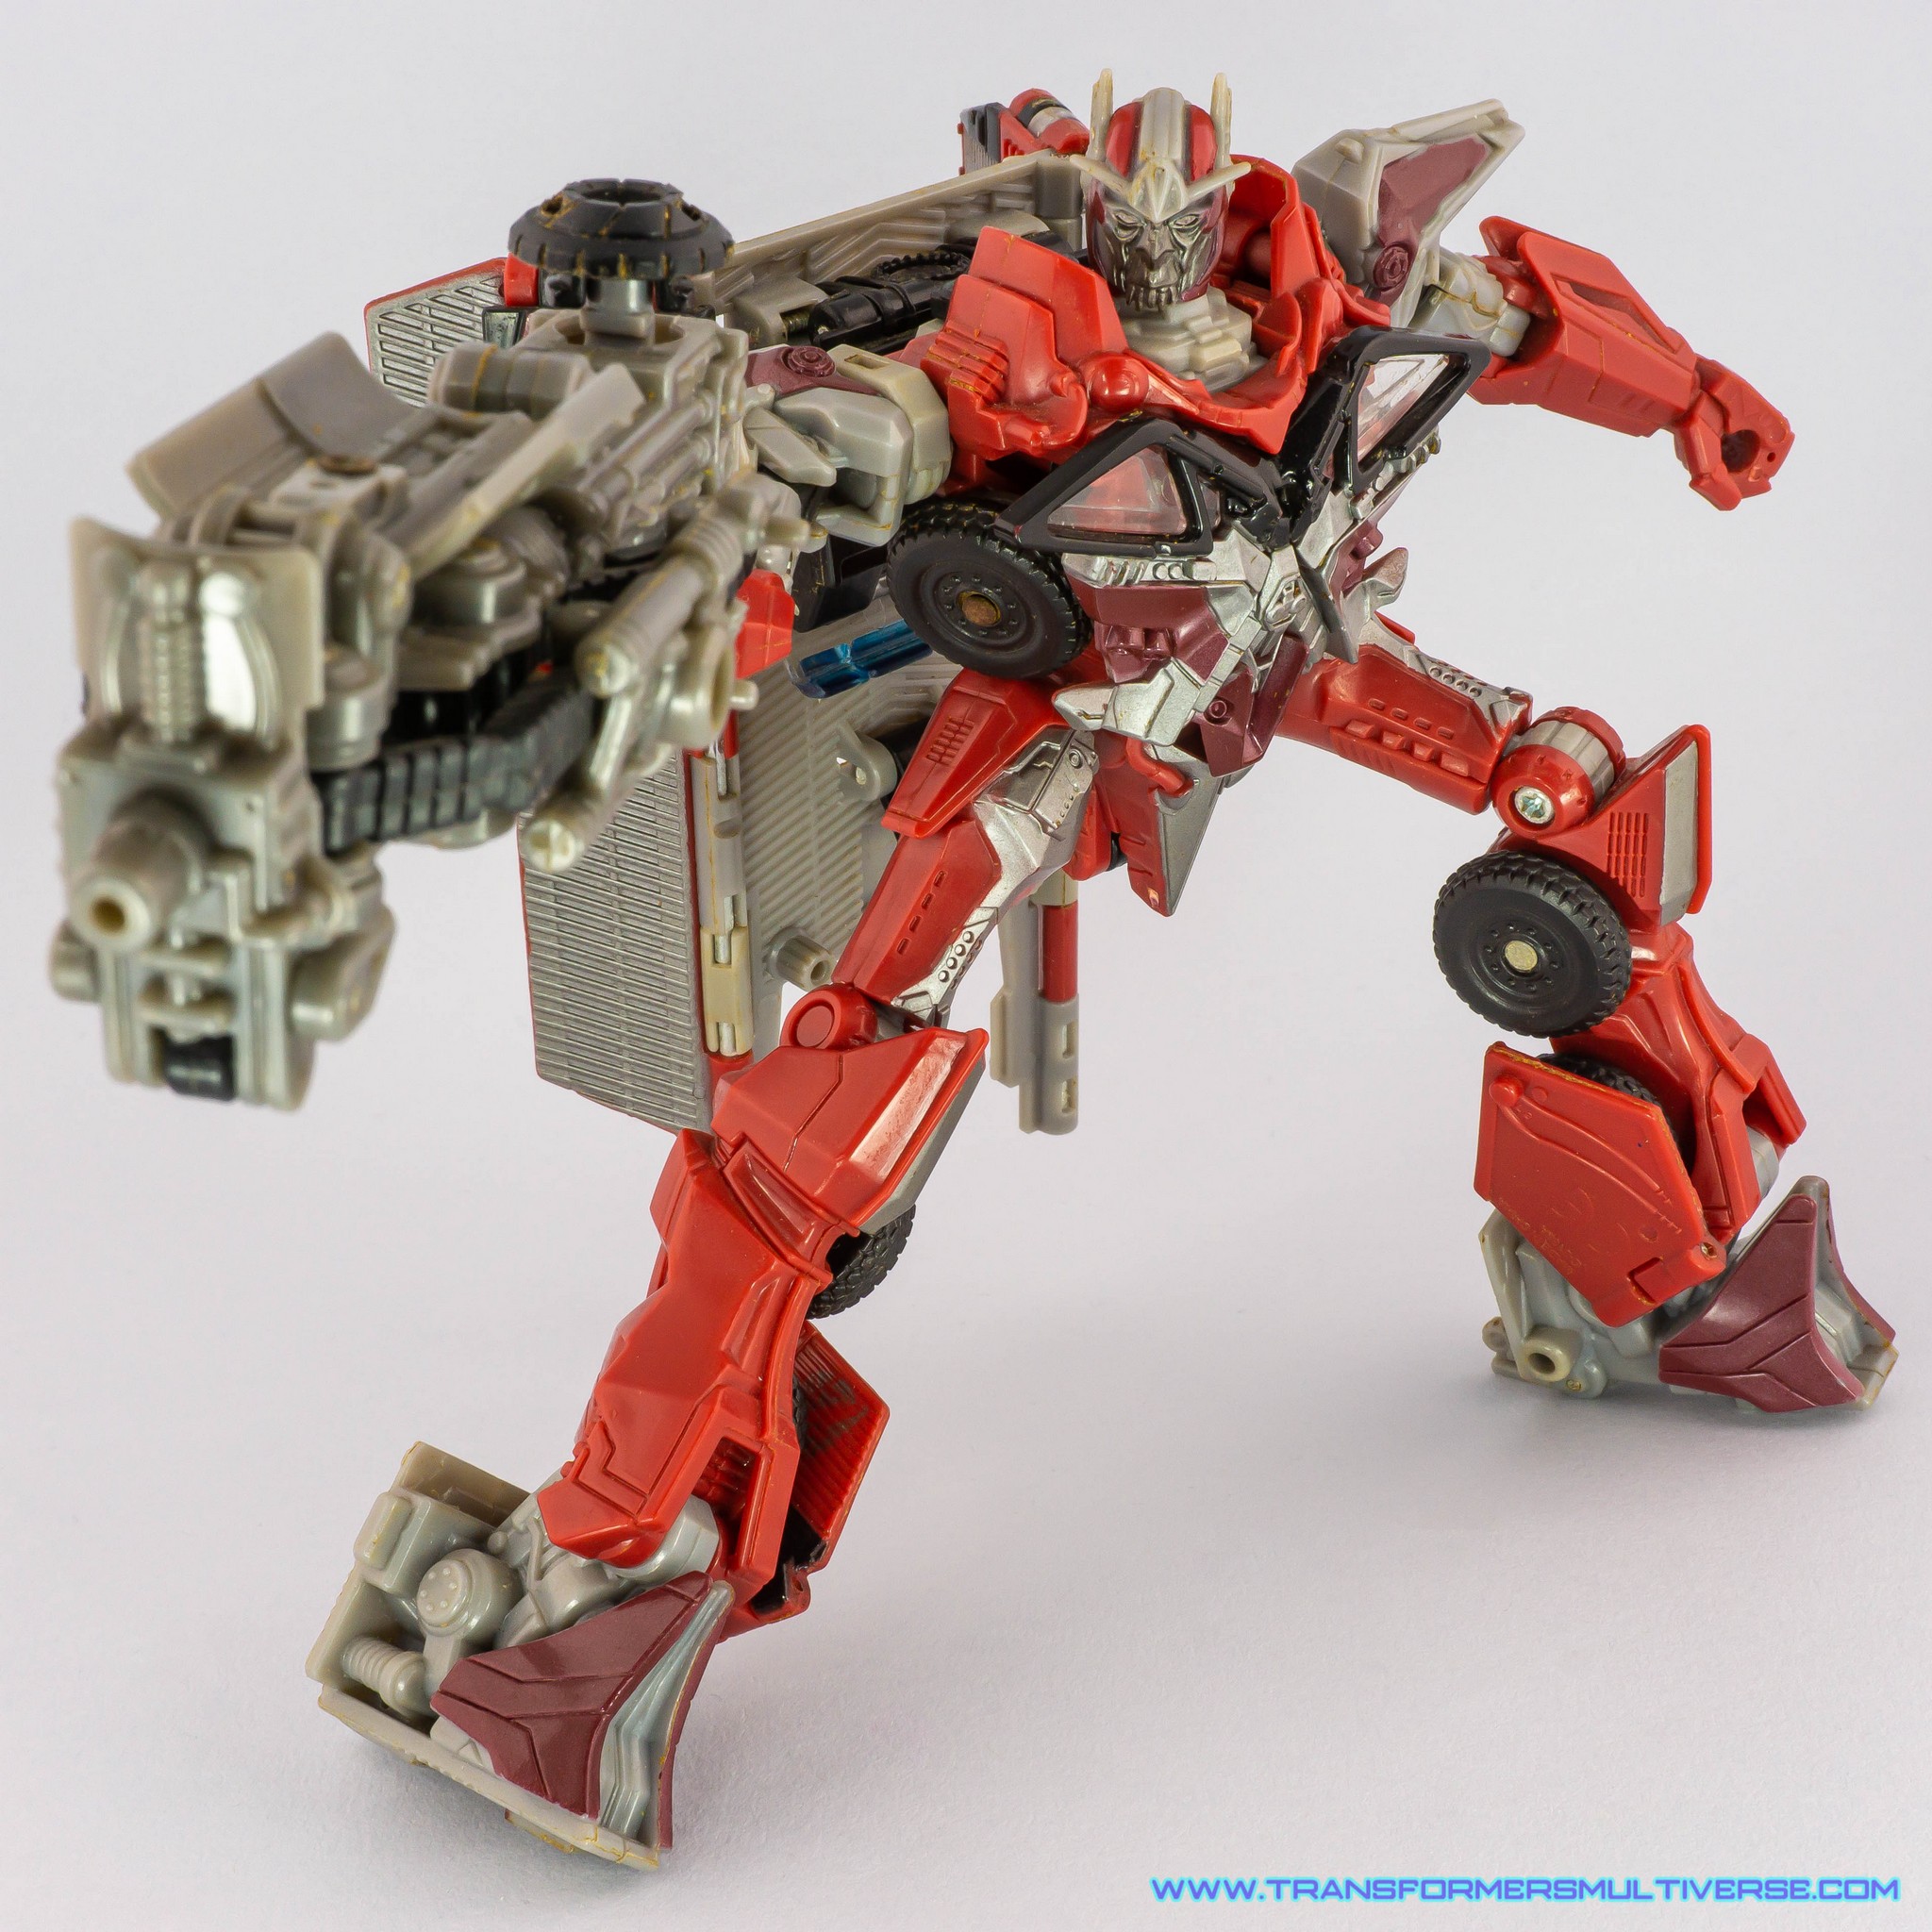 Transformers Dark of the Moon Sentinel Prime posed with MechTech rifle